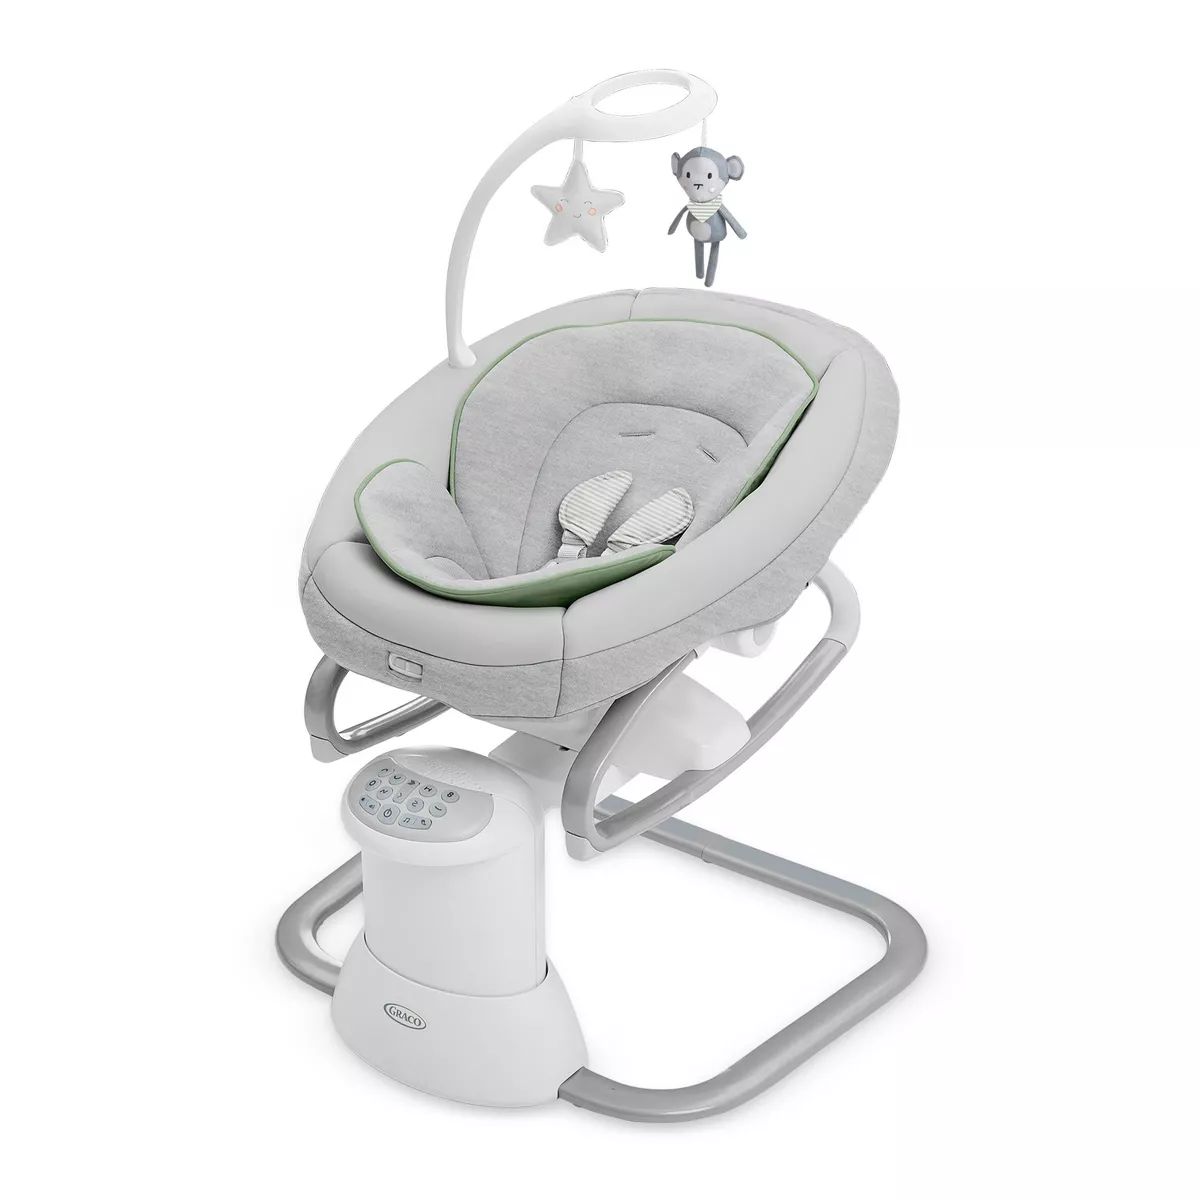 Graco Soothe My Way Baby Swing with Removable Rocker | Target